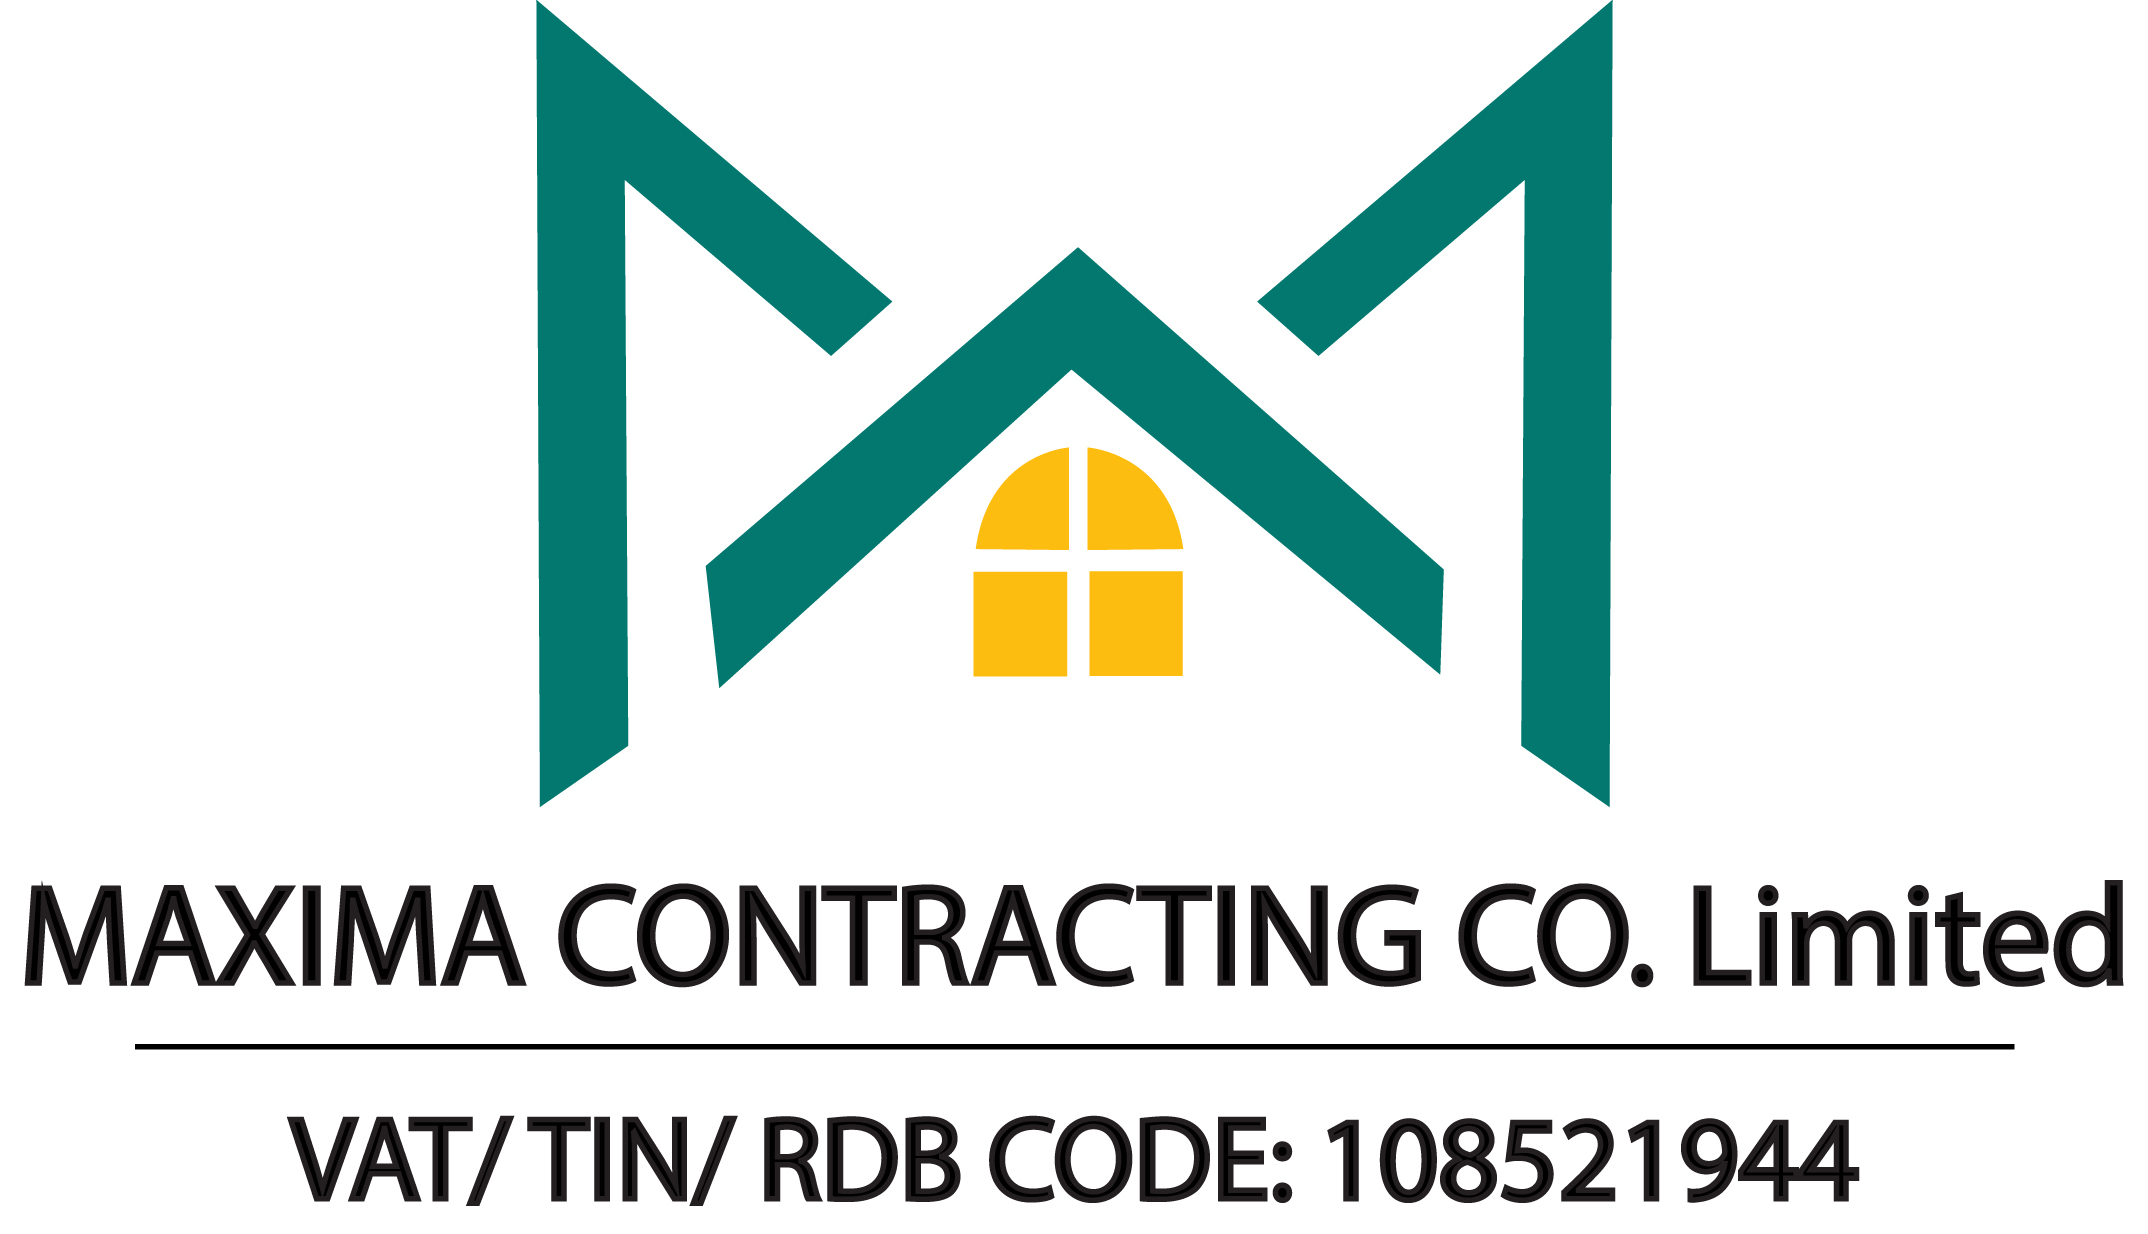 MAXIMA CONTRACTING CO., Limited